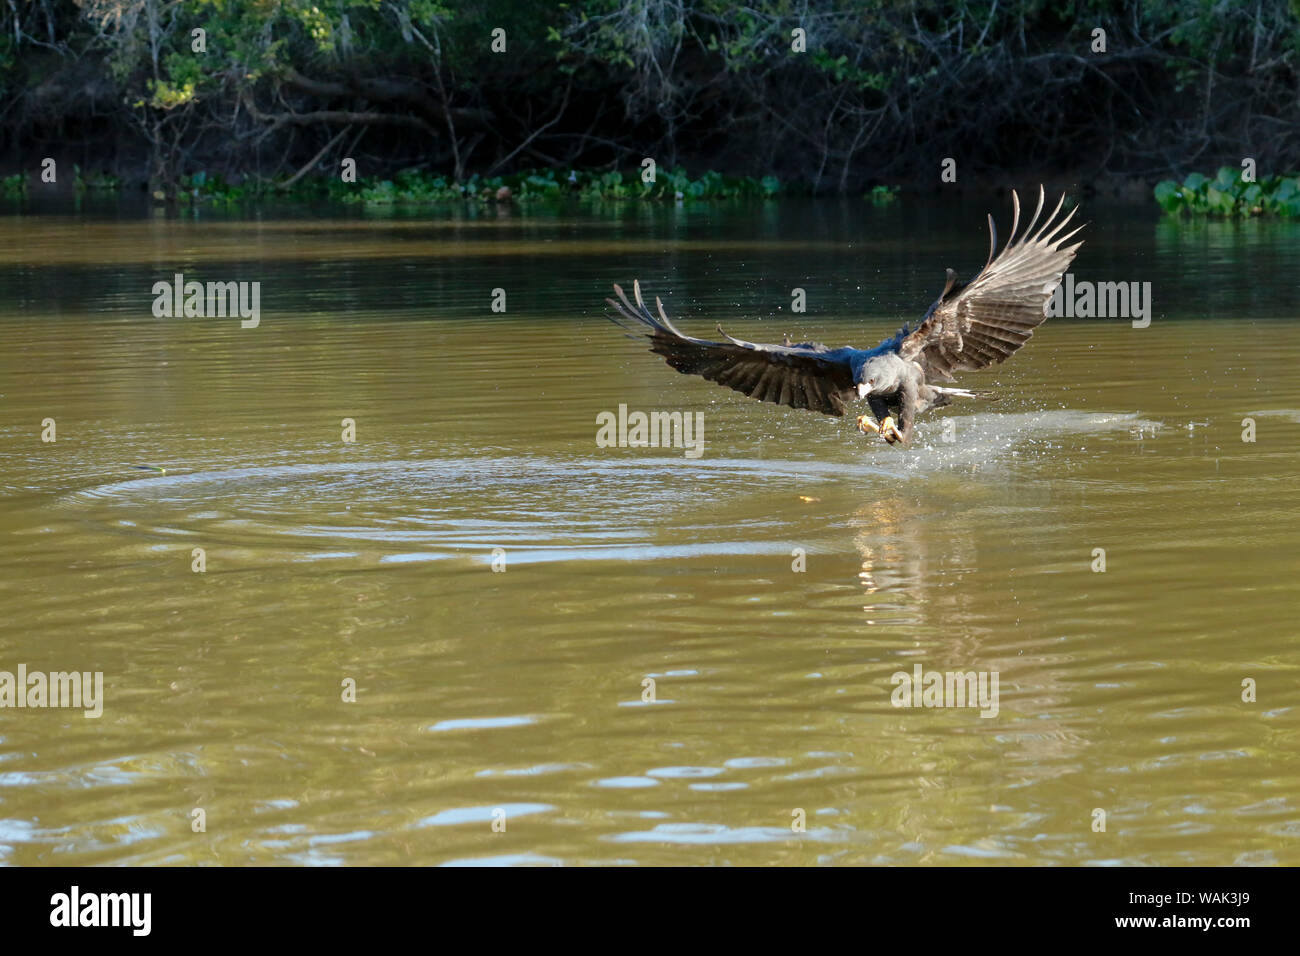 Pantanal, Mato Grosso, Brazil. Great black hawk swooping down to catch a fish in the Pixaim River. Stock Photo